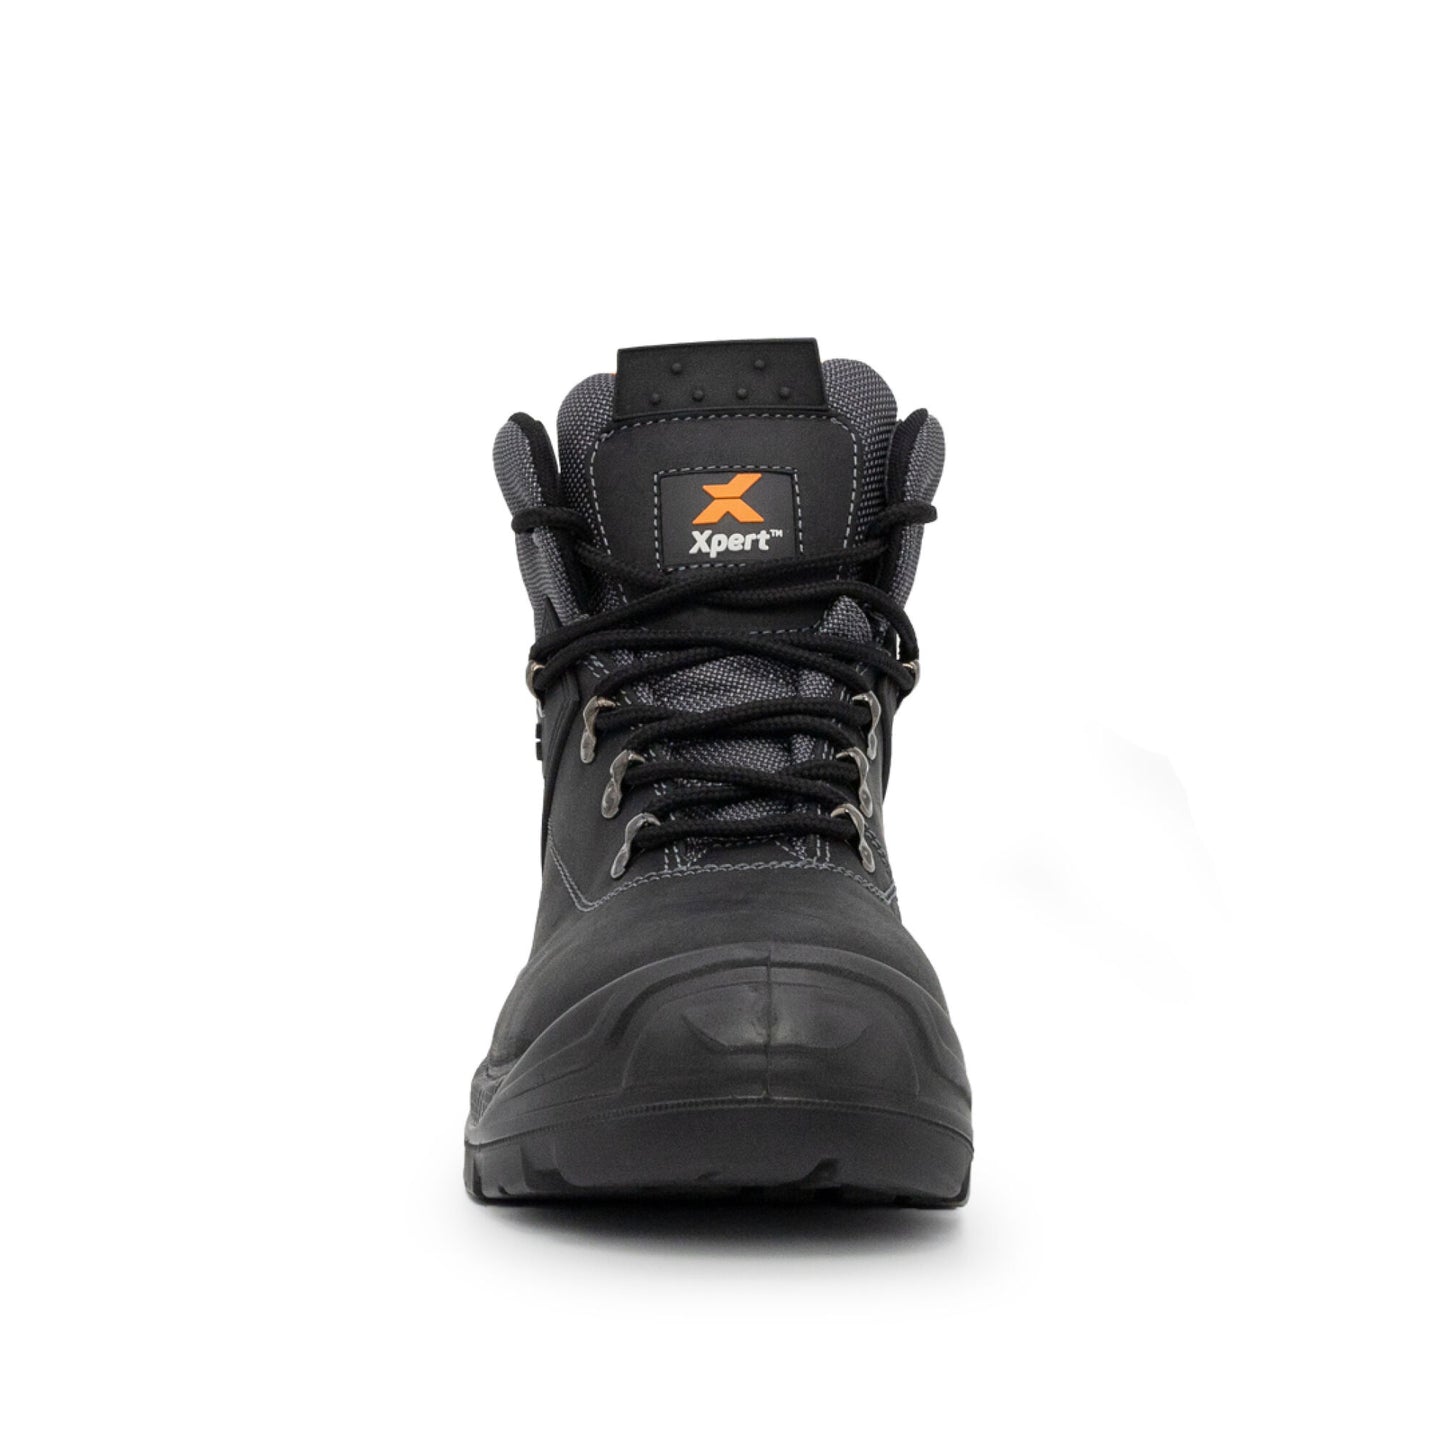 Xpert Warrior S3 Safety Boot